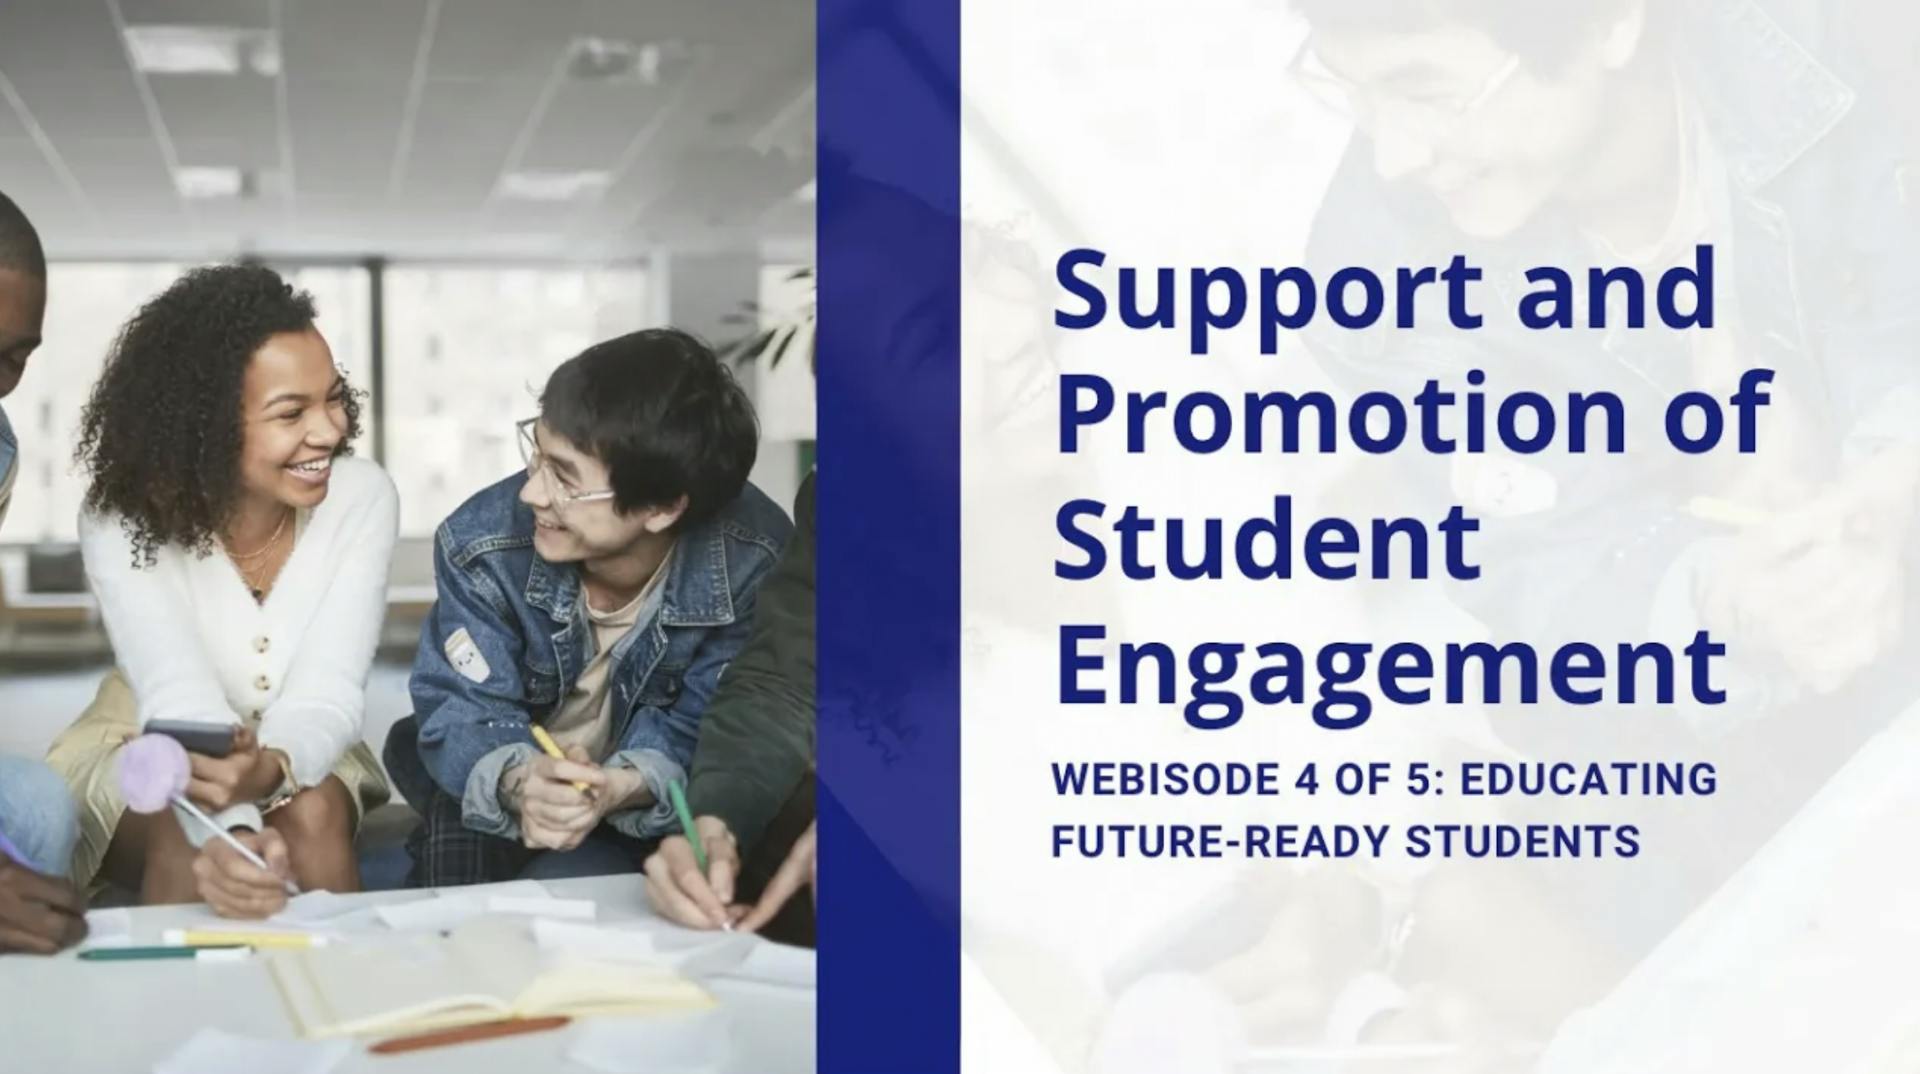 Webisode 4 of 5: Support and Promotion of Student Engagement